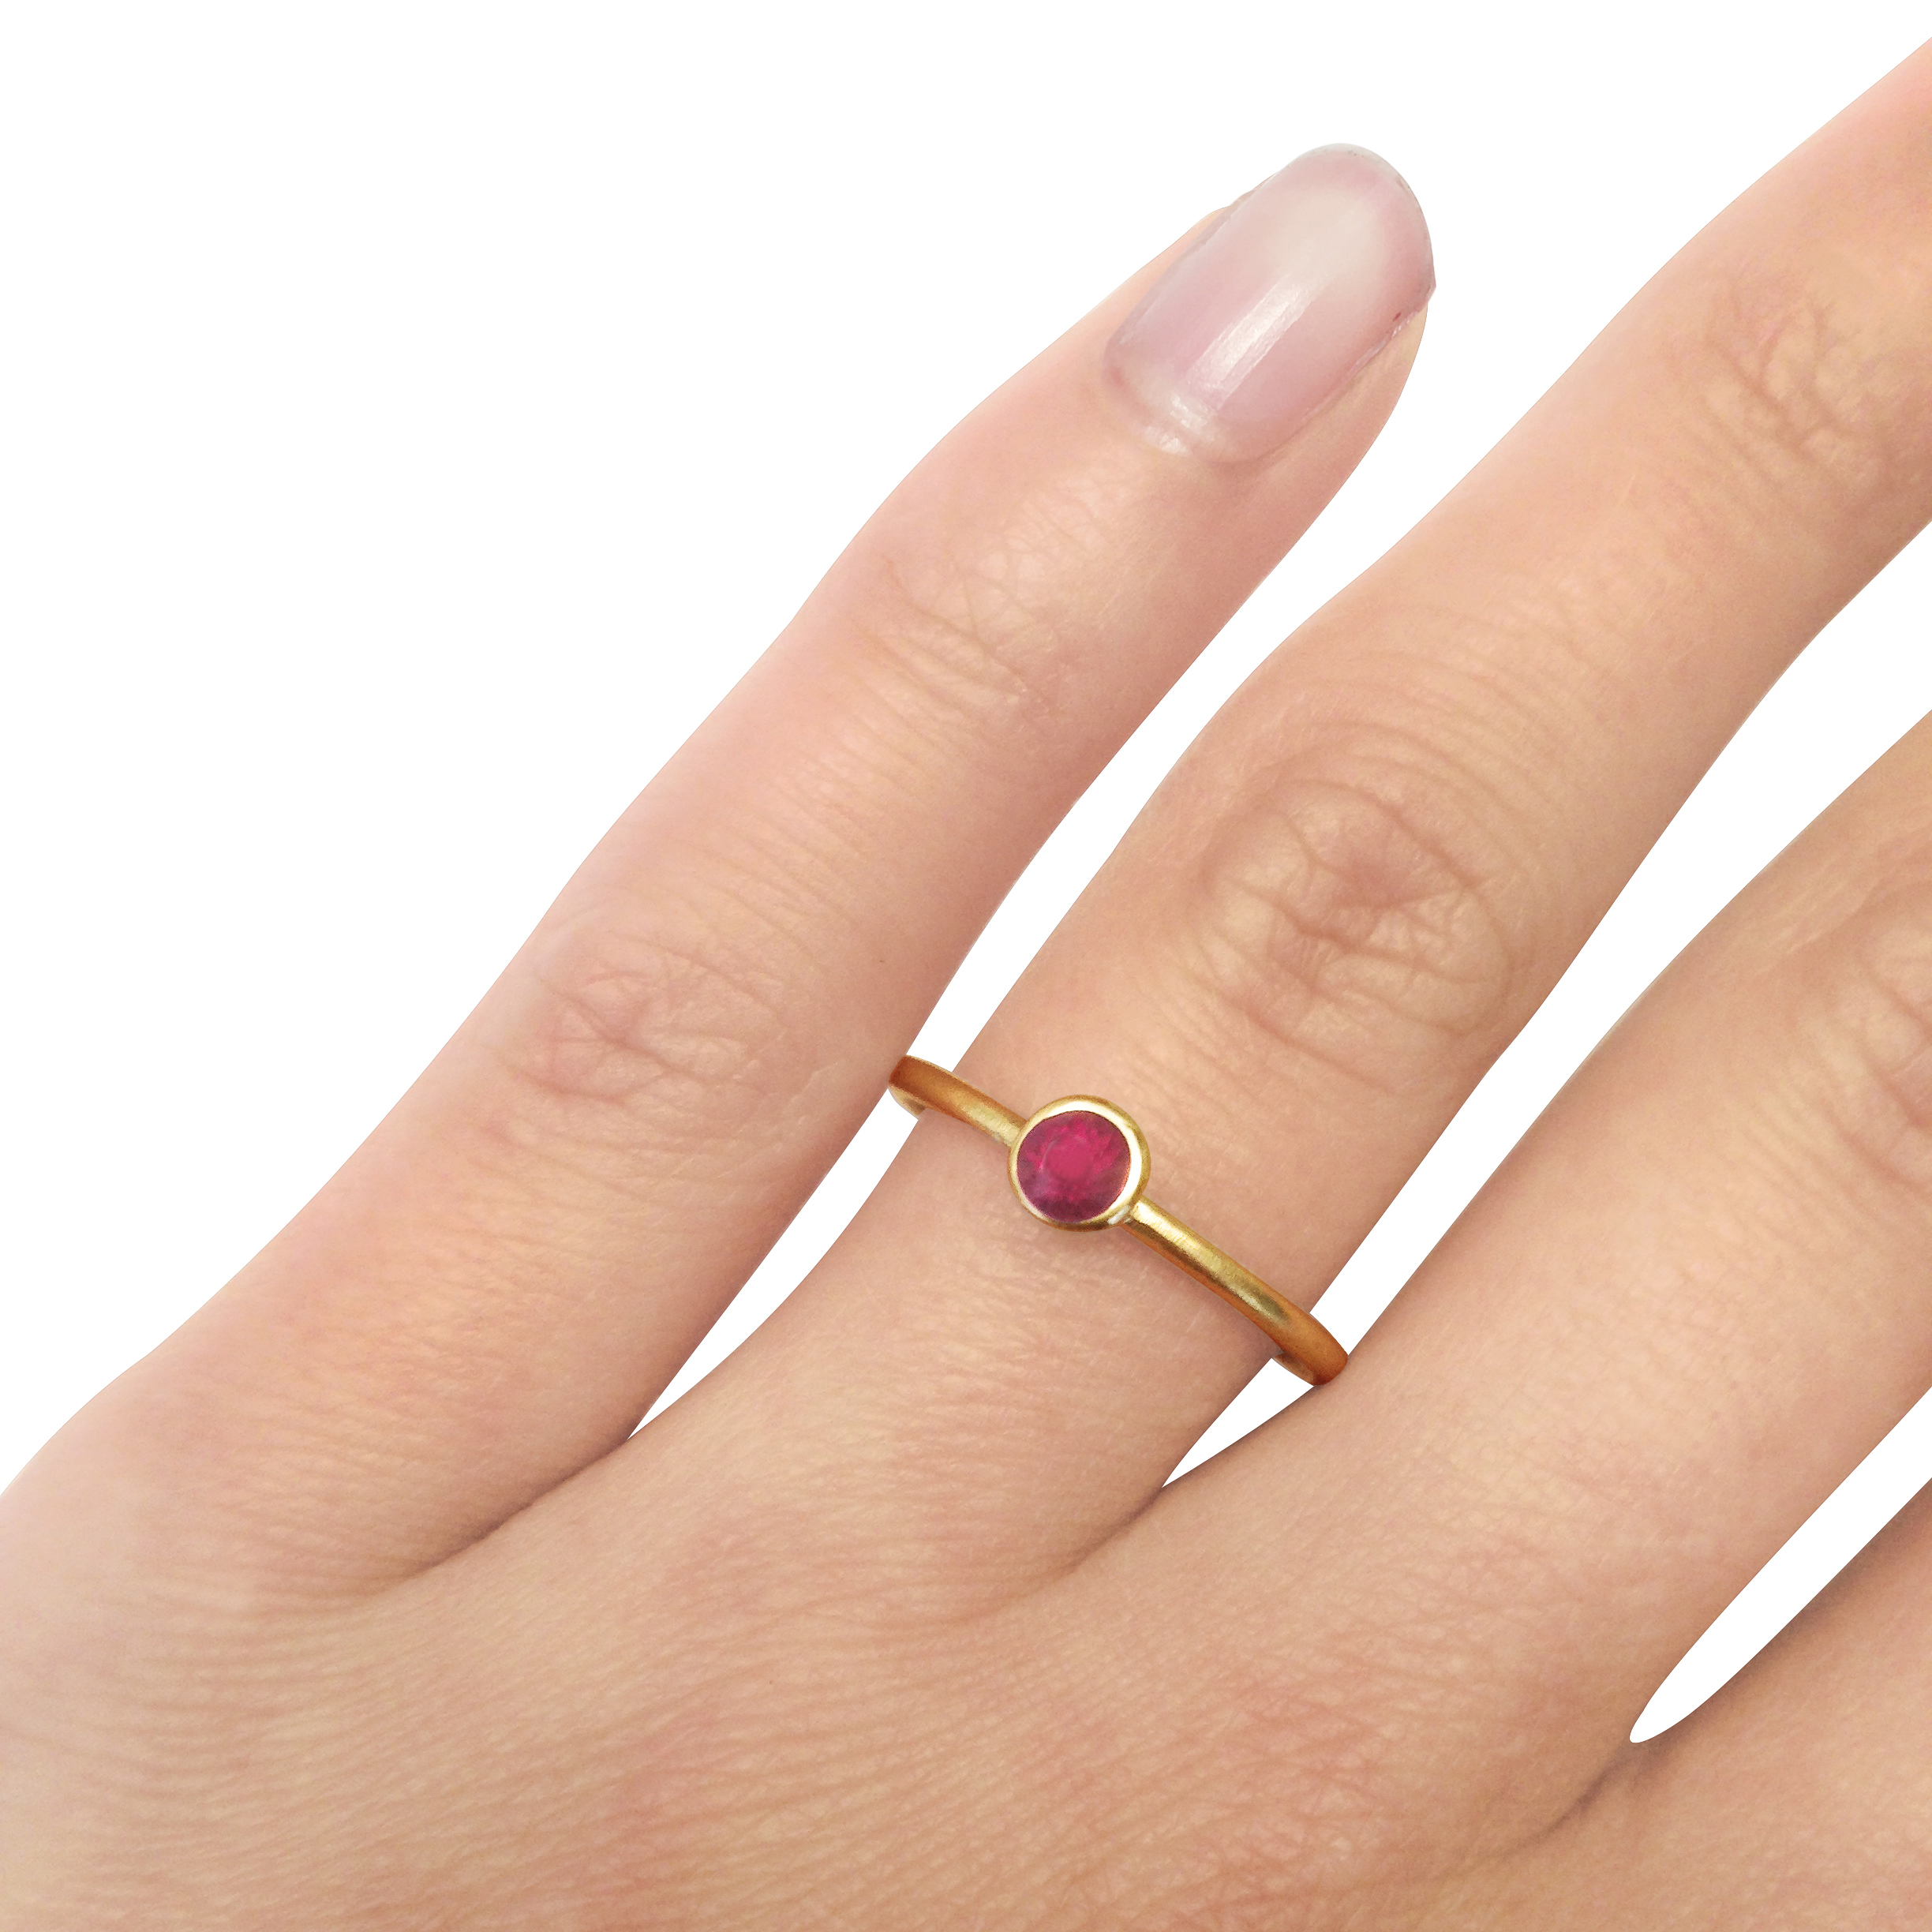 ruby-and-9-ct-gold-single-stone-stacking-ring-4.jpg